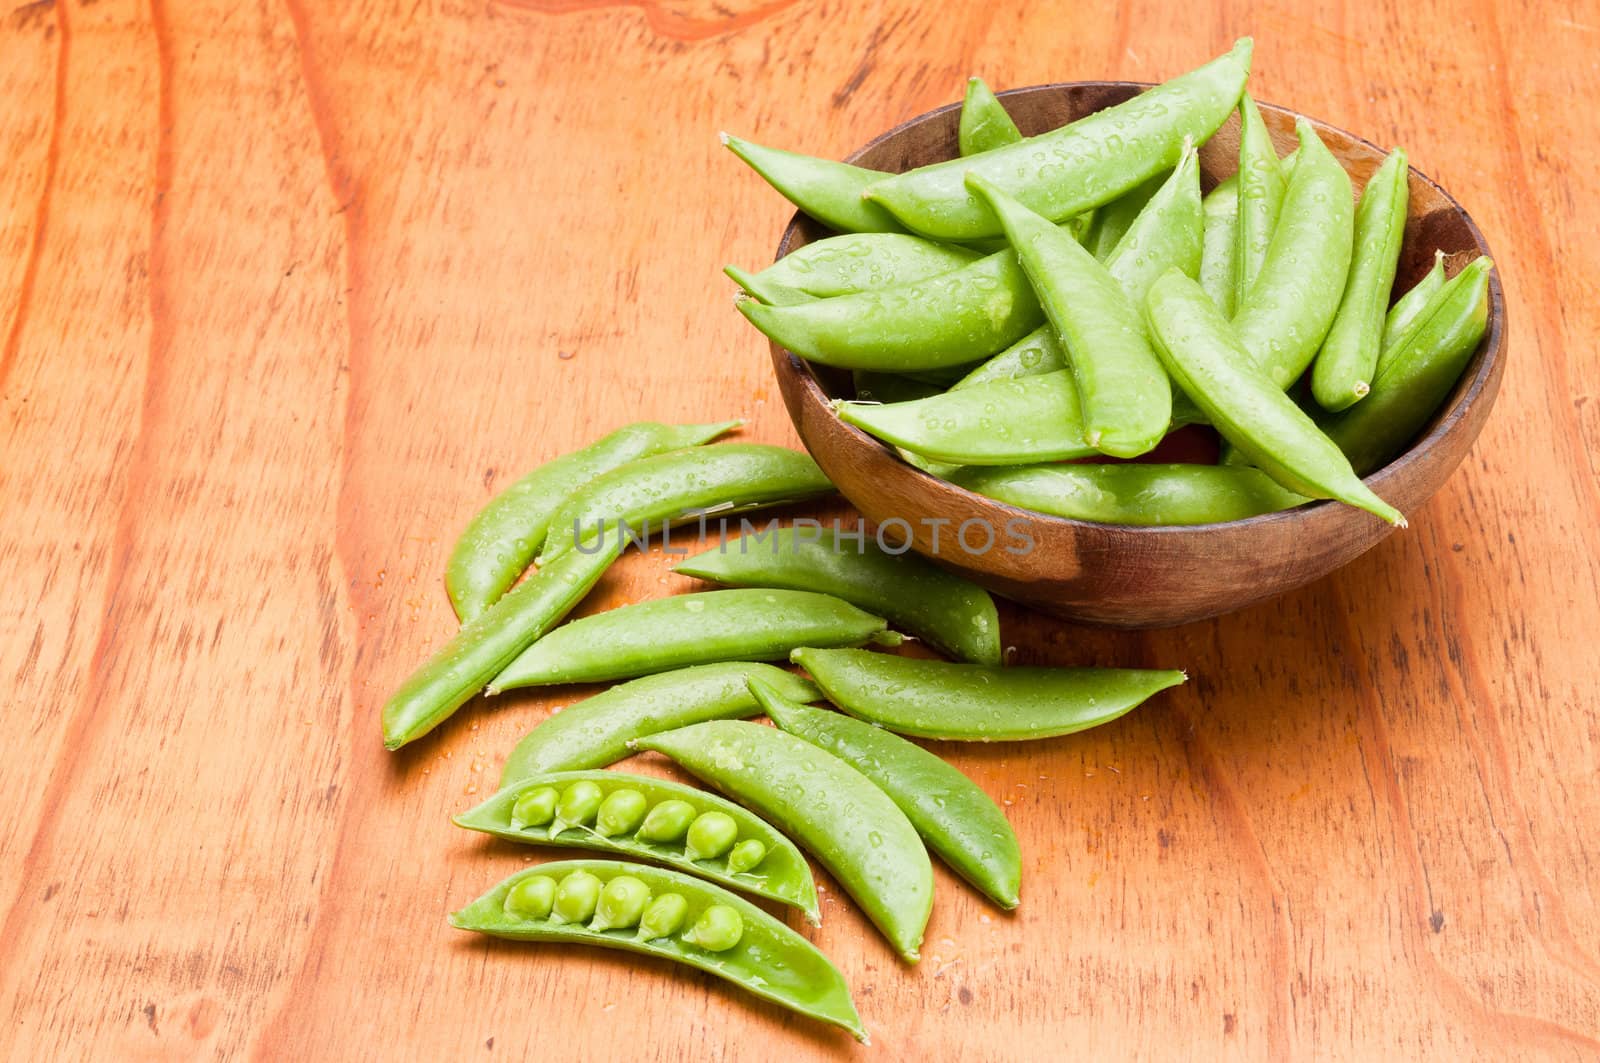 Snap Peas by timh